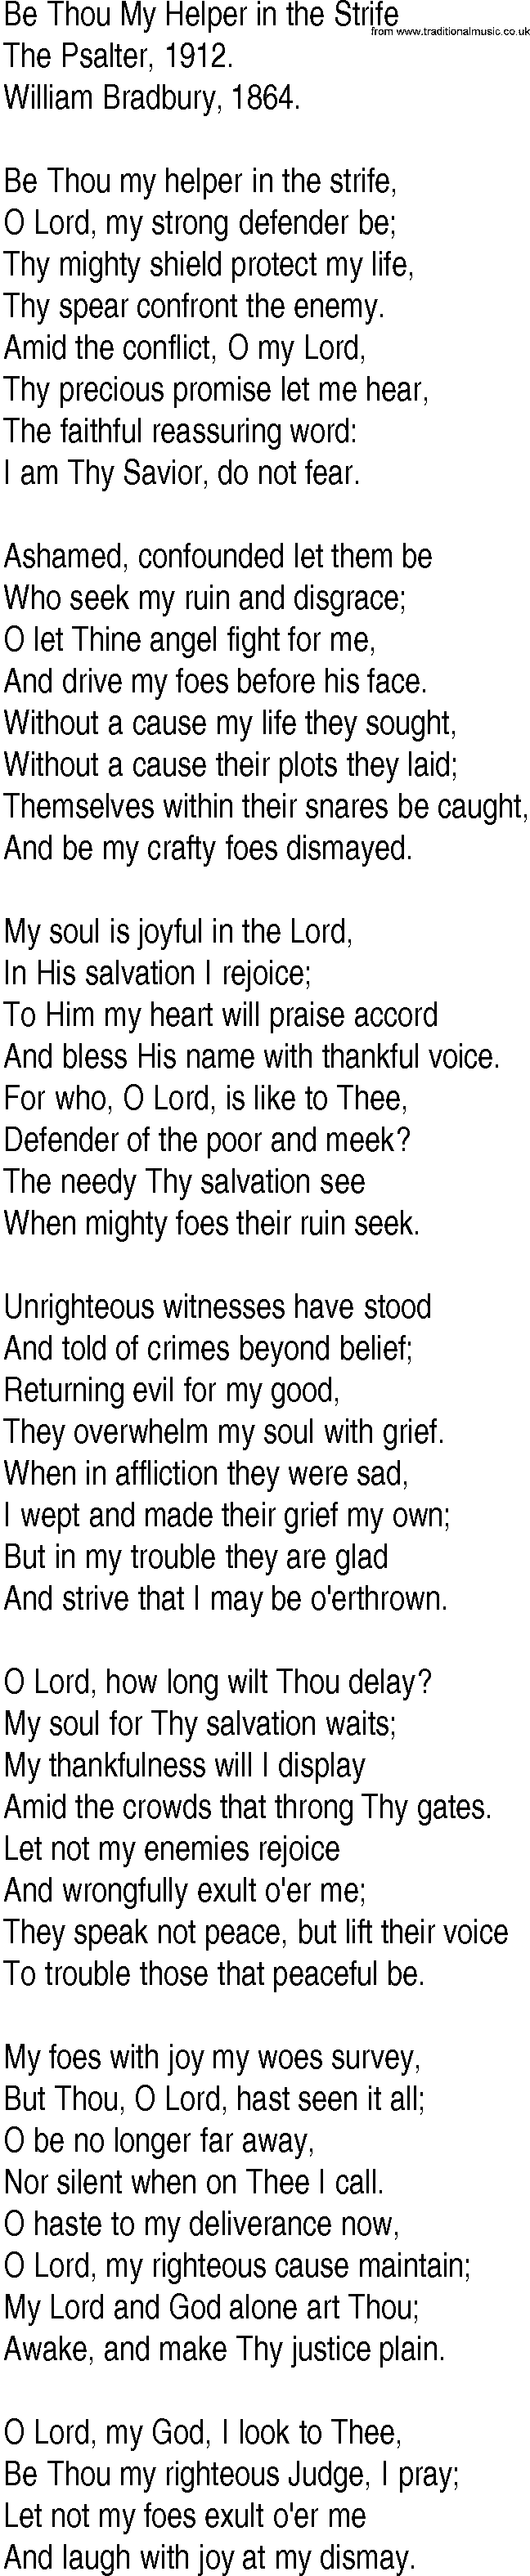 Hymn and Gospel Song: Be Thou My Helper in the Strife by The Psalter lyrics